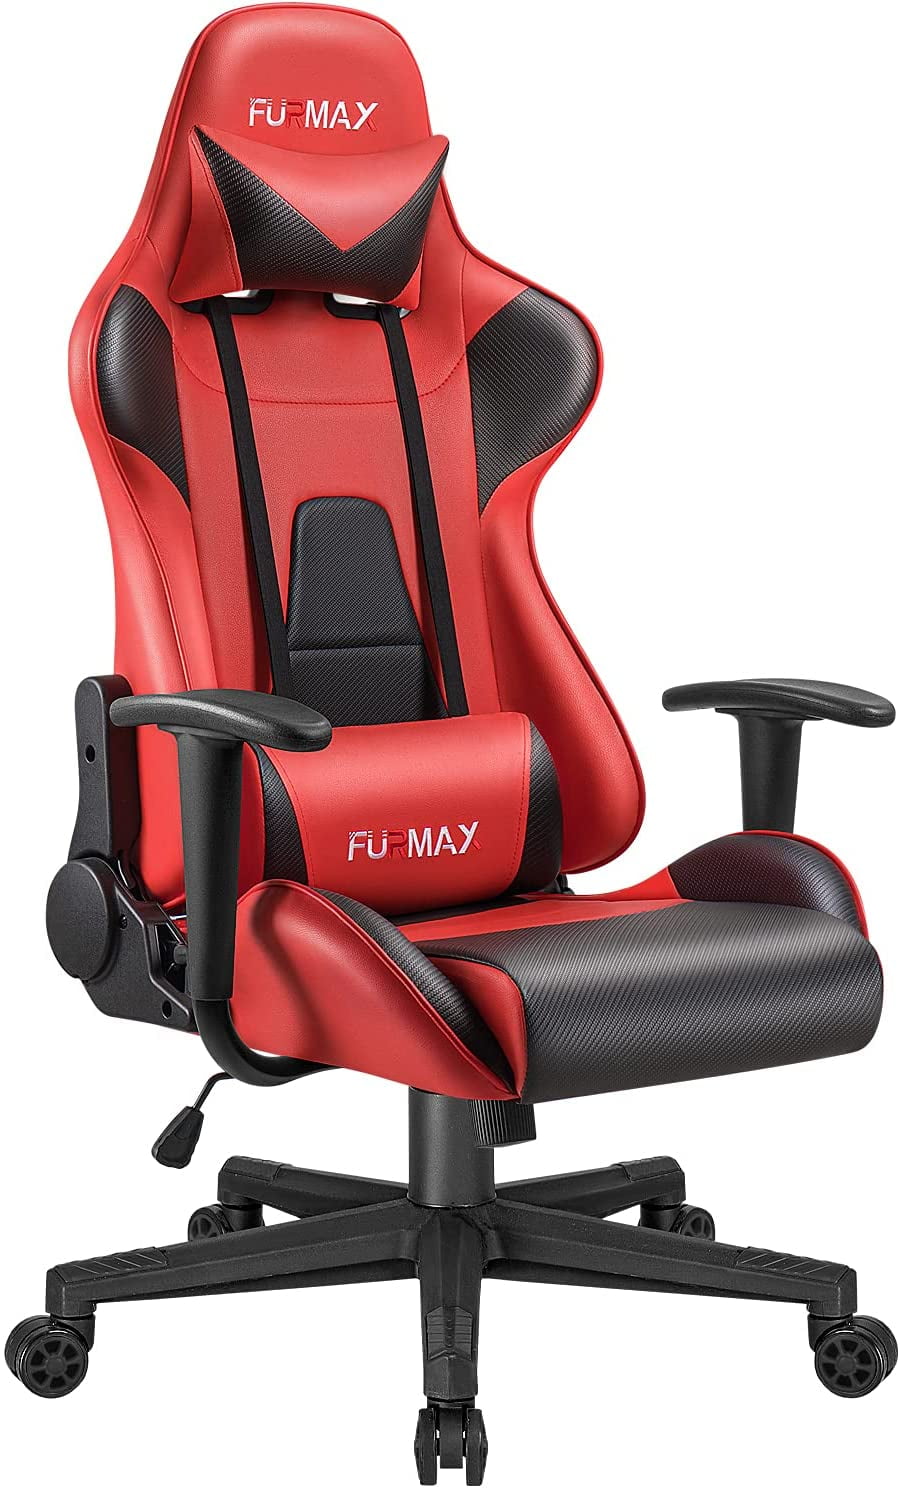 Modern Executive Racing Style Gaming Chair High Back Recliner PU Leather Swivel 